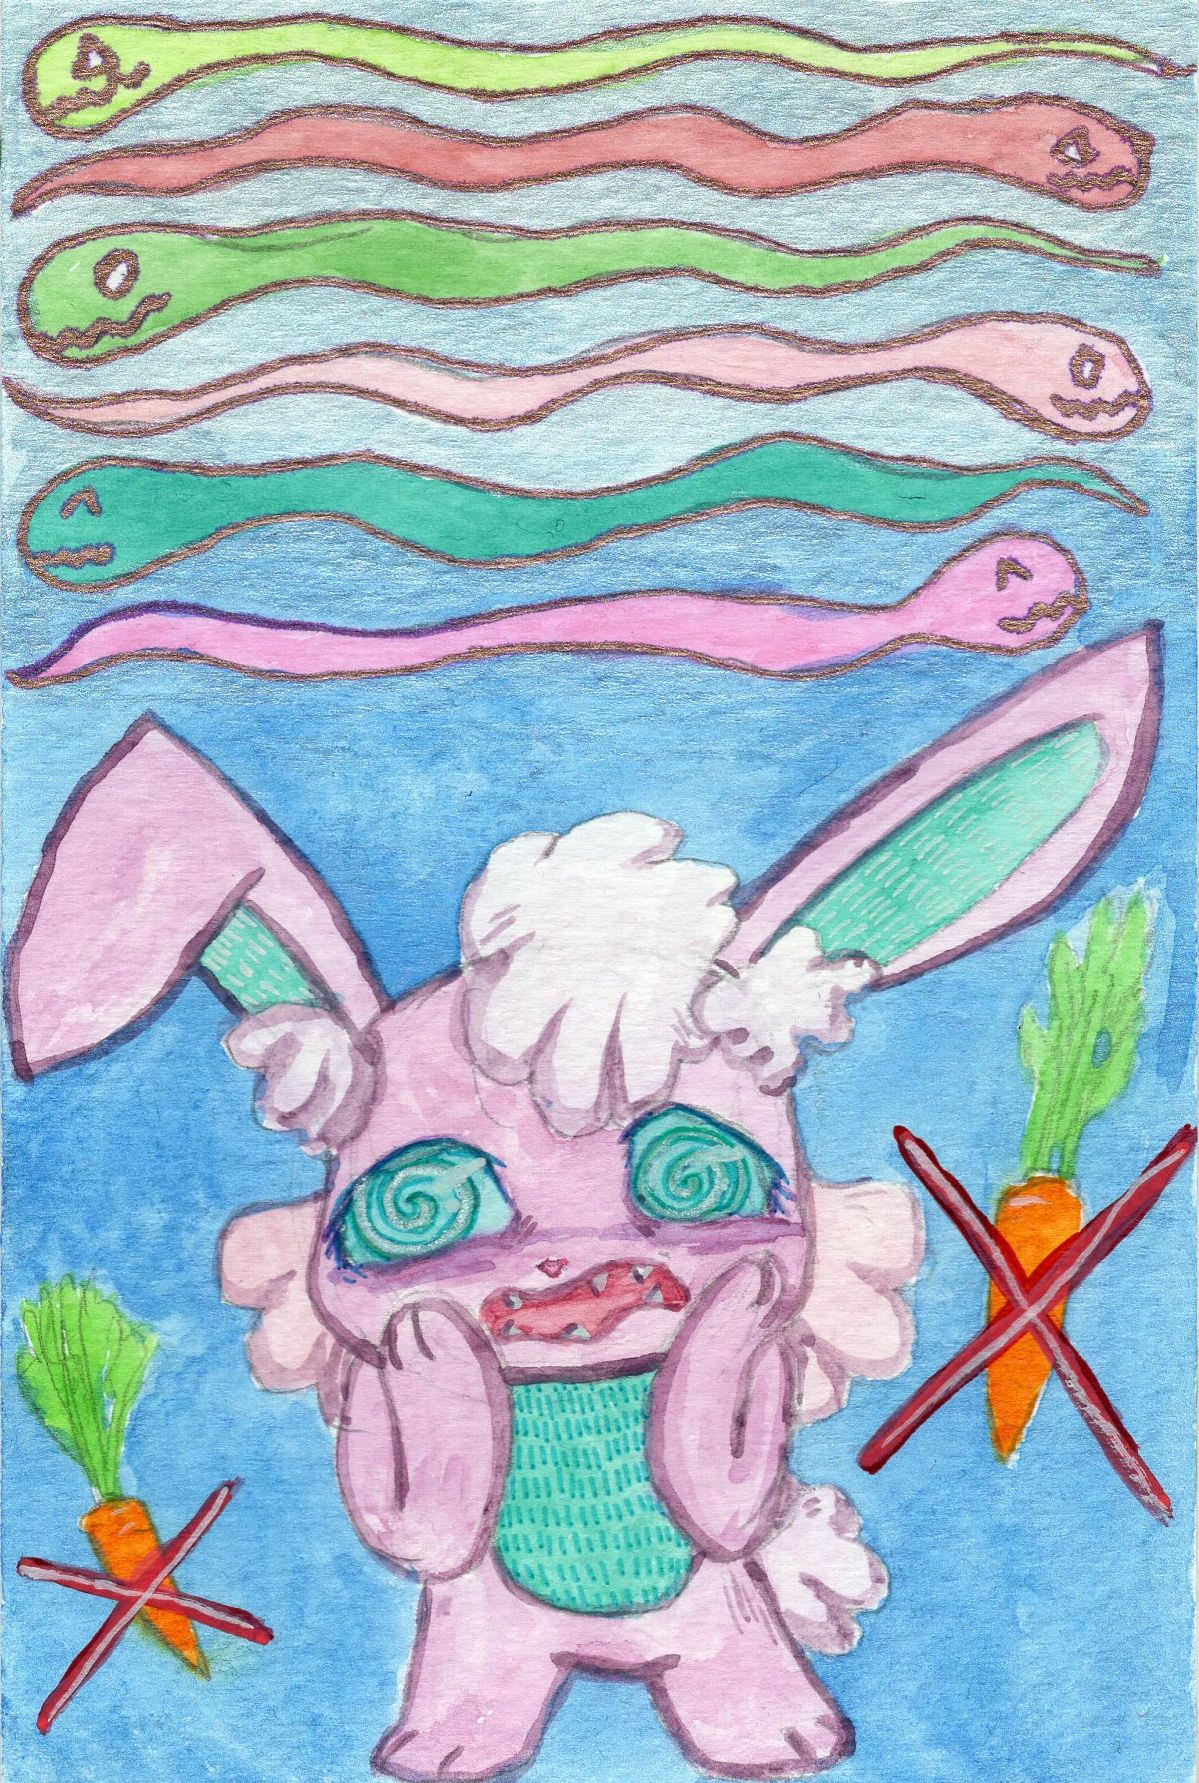 a cutsy rabbit with colorful snakes floating above with carrots to the side that are x'ed out with red